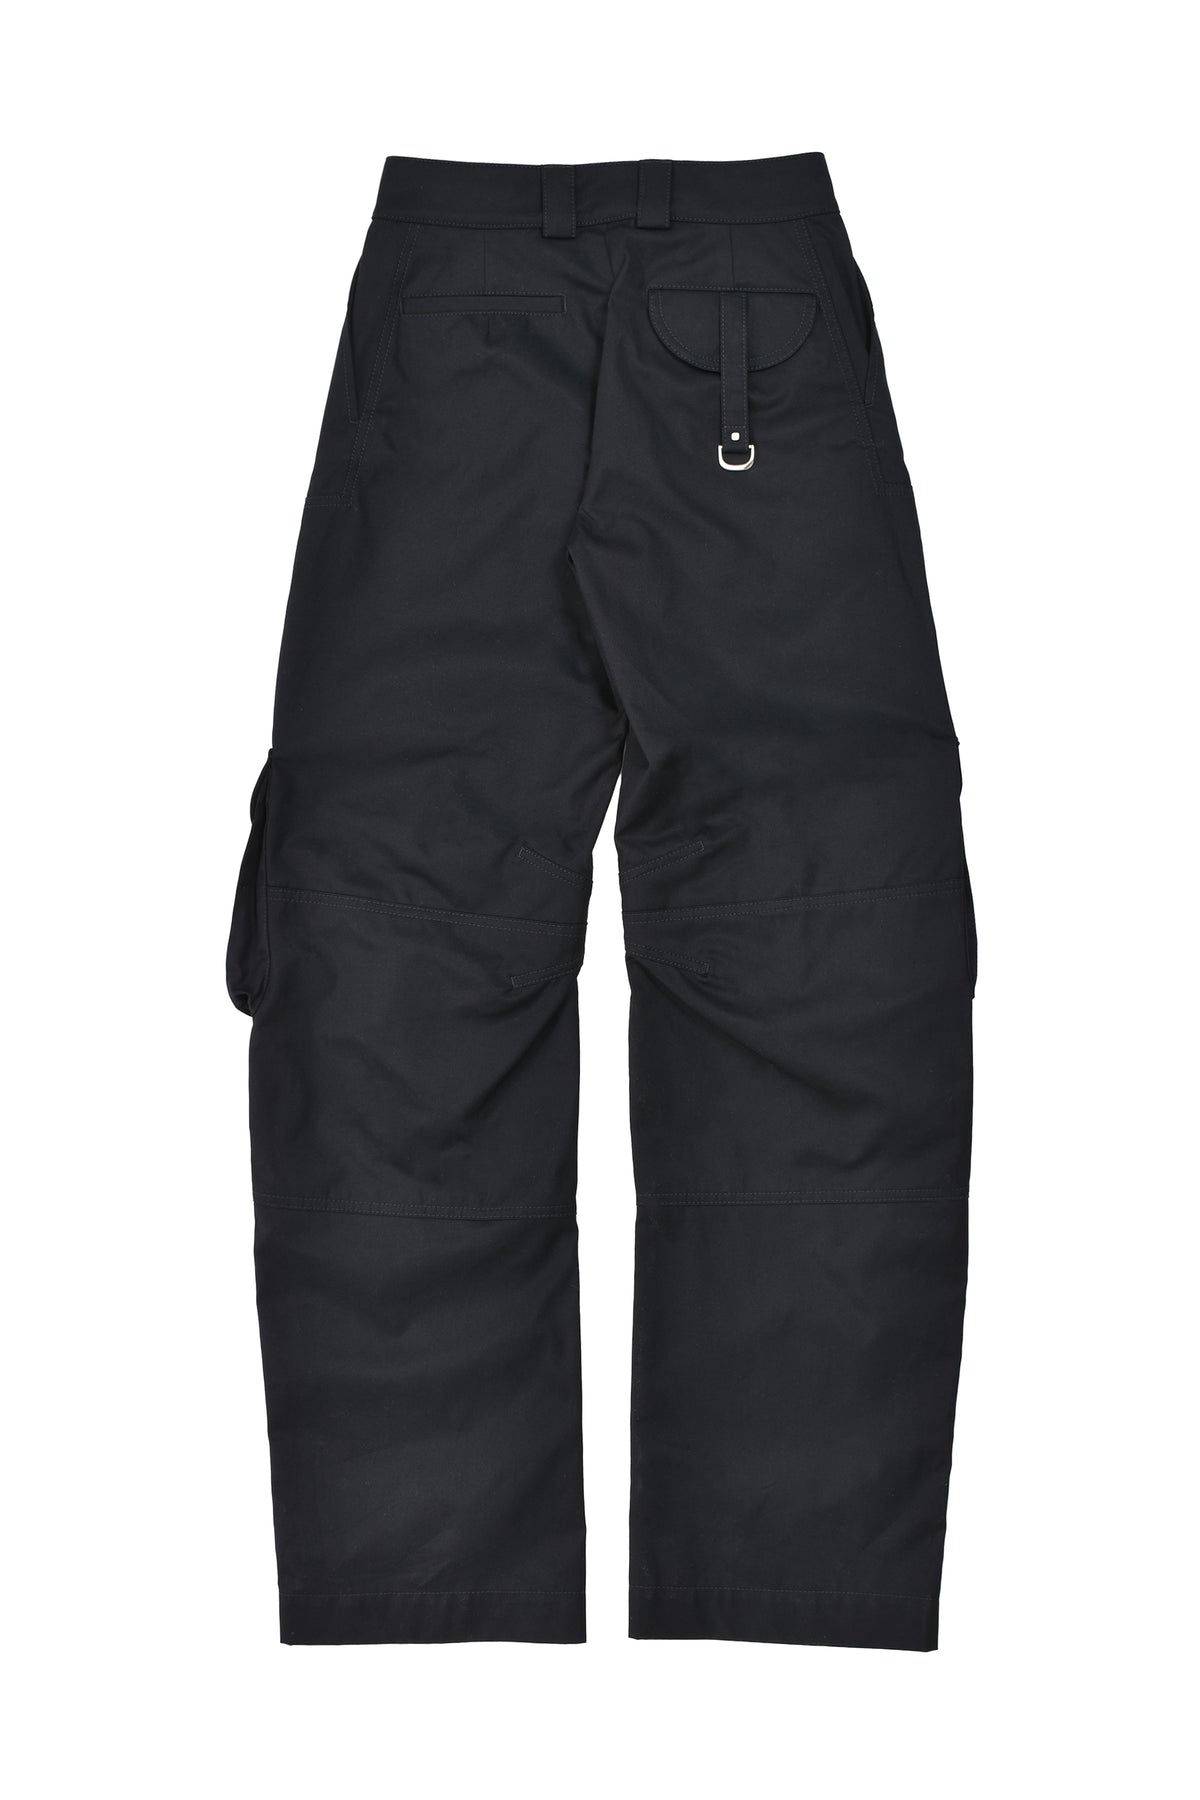 Off-White CO SIMPLE CARGO PKT OVER PANT / BLK